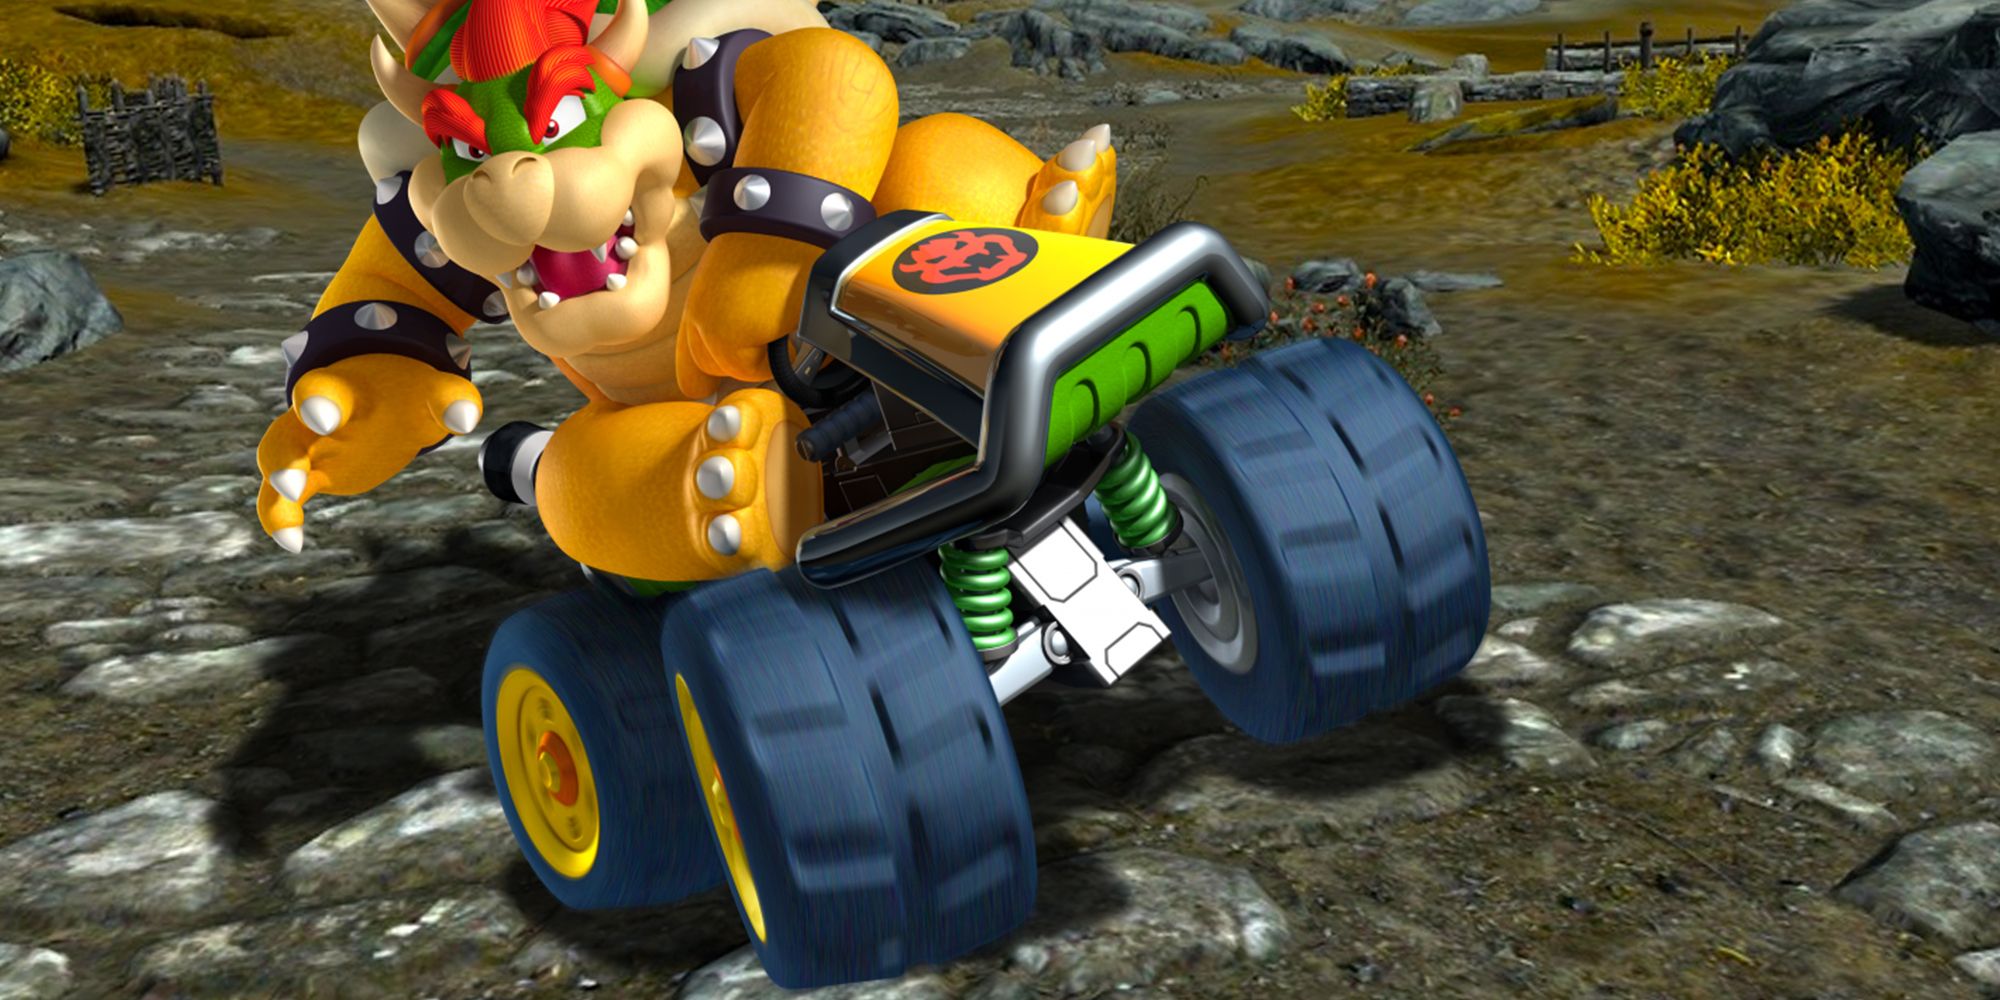 Bowser driving on a roadway in Skyrim